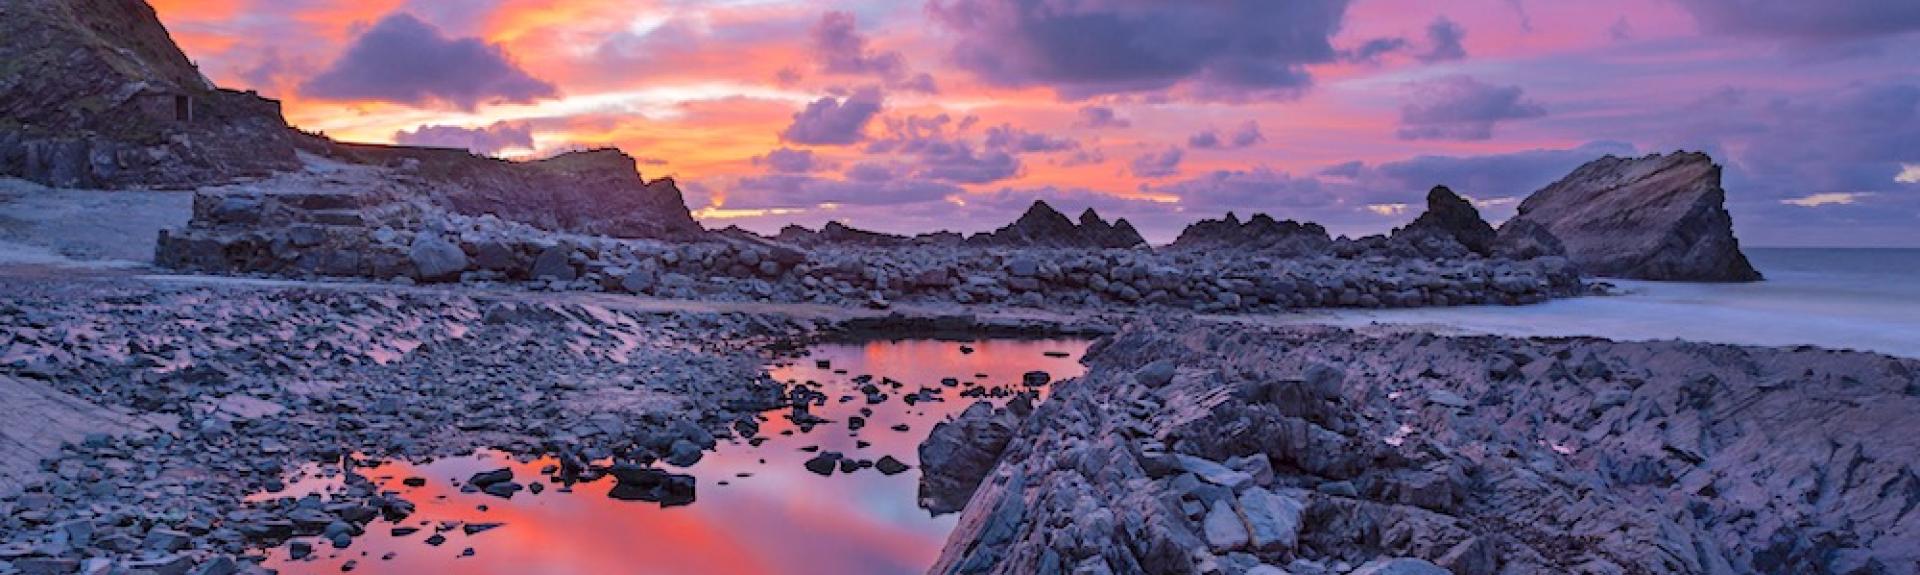 A sunset over a rocky beach with large rock pools reflecting the clouds.